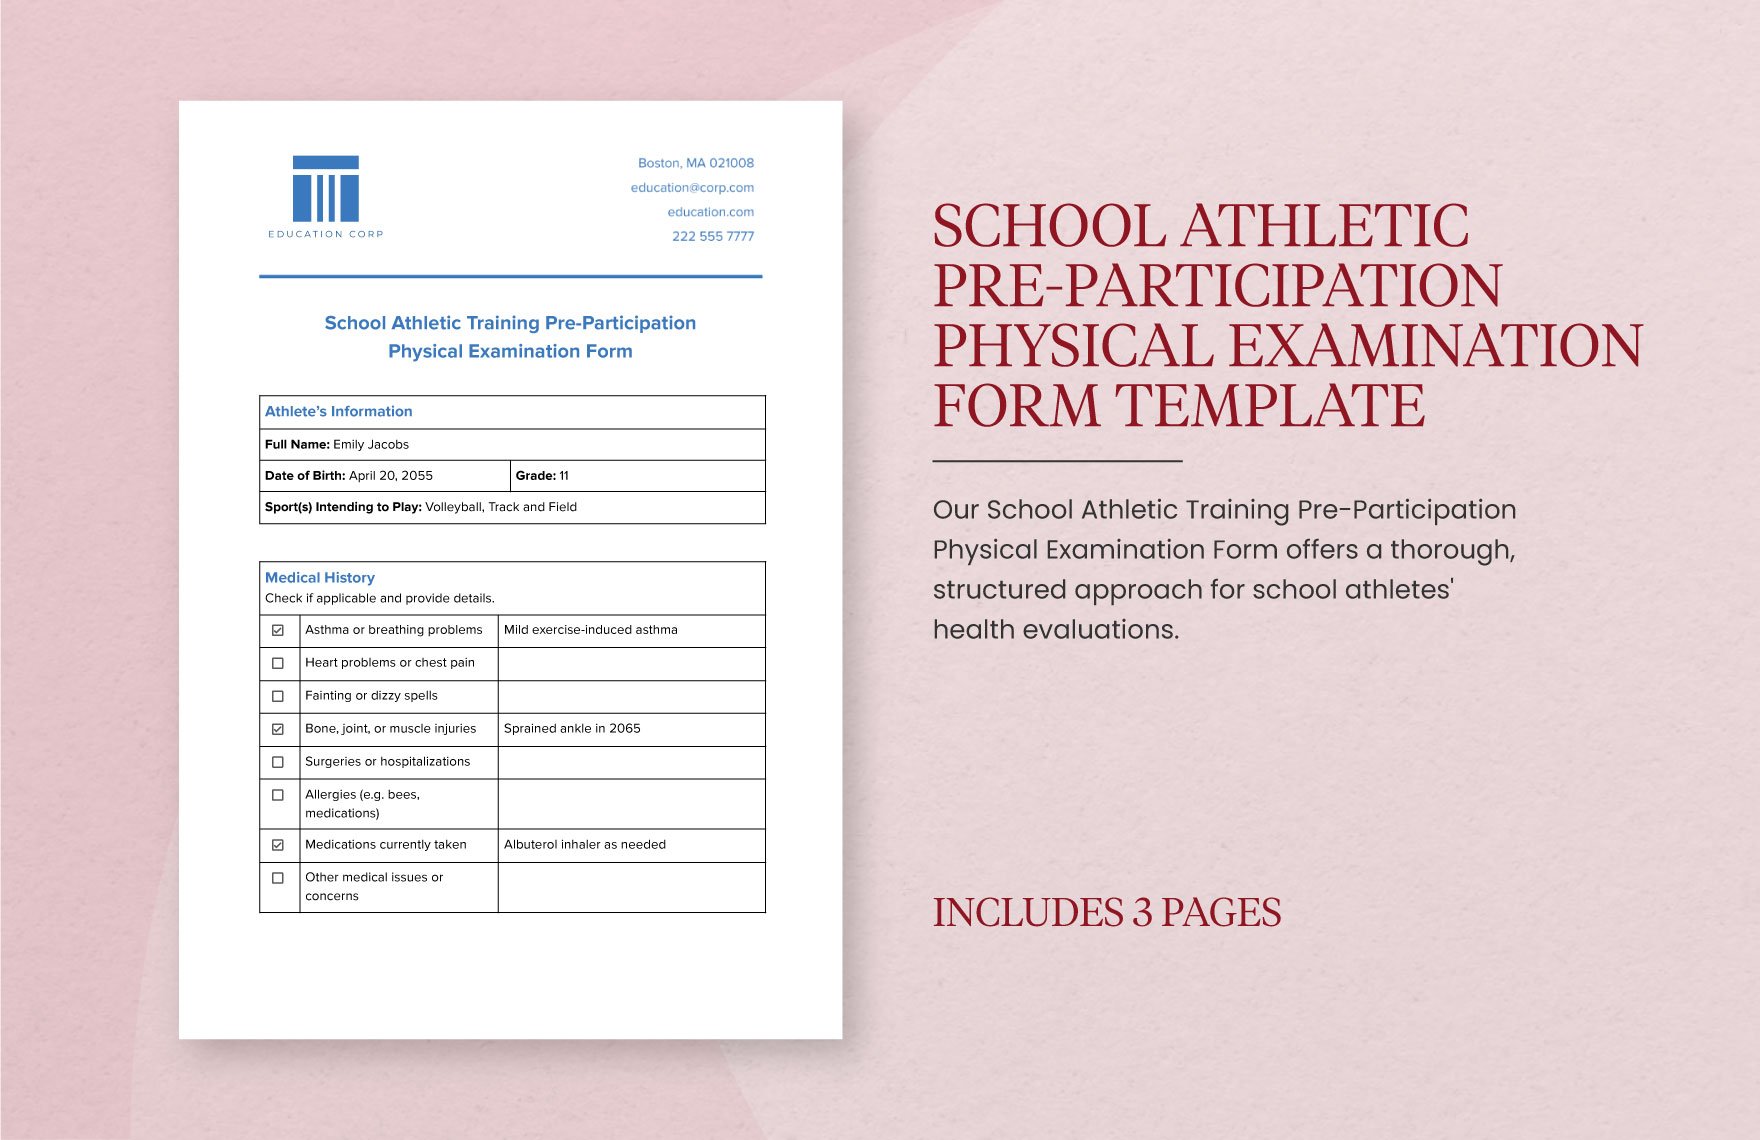 School Athletic Training Pre-Participation Physical Examination Form Template